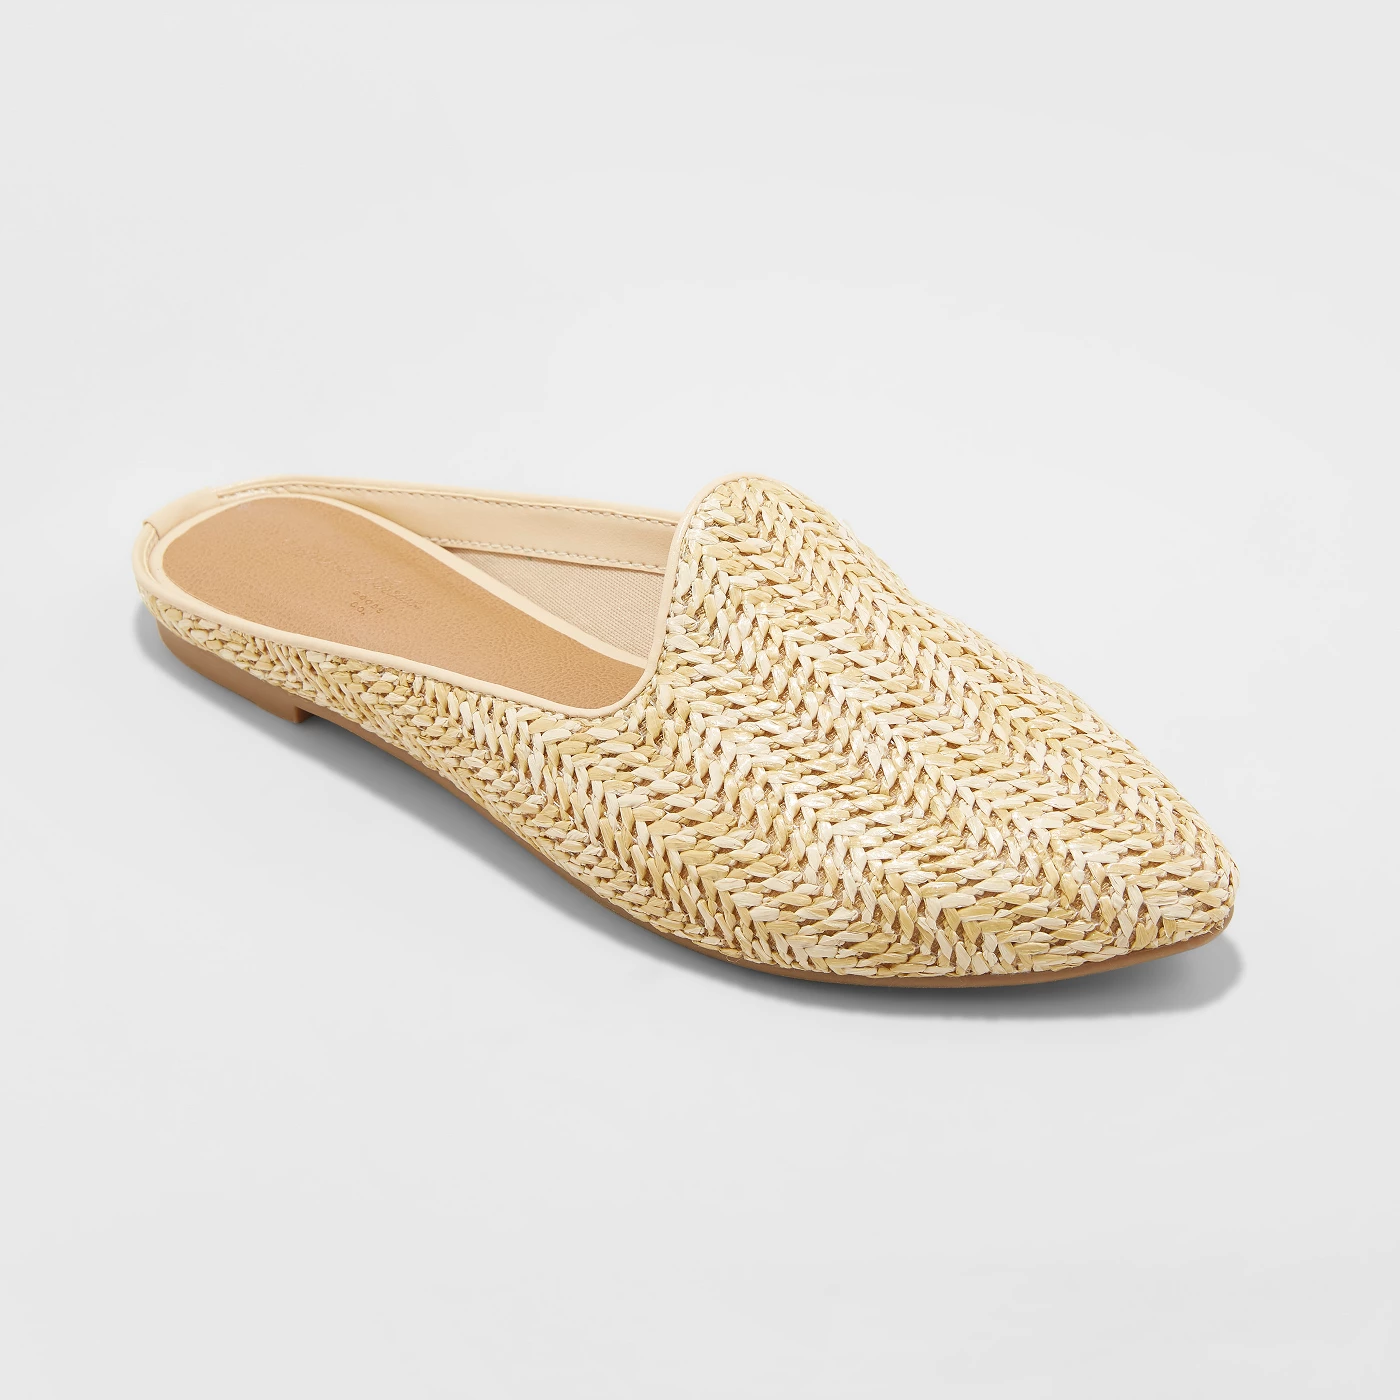 Women's Violet Woven Backless Mules - Universal Threadâ„¢ - image 1 of 3